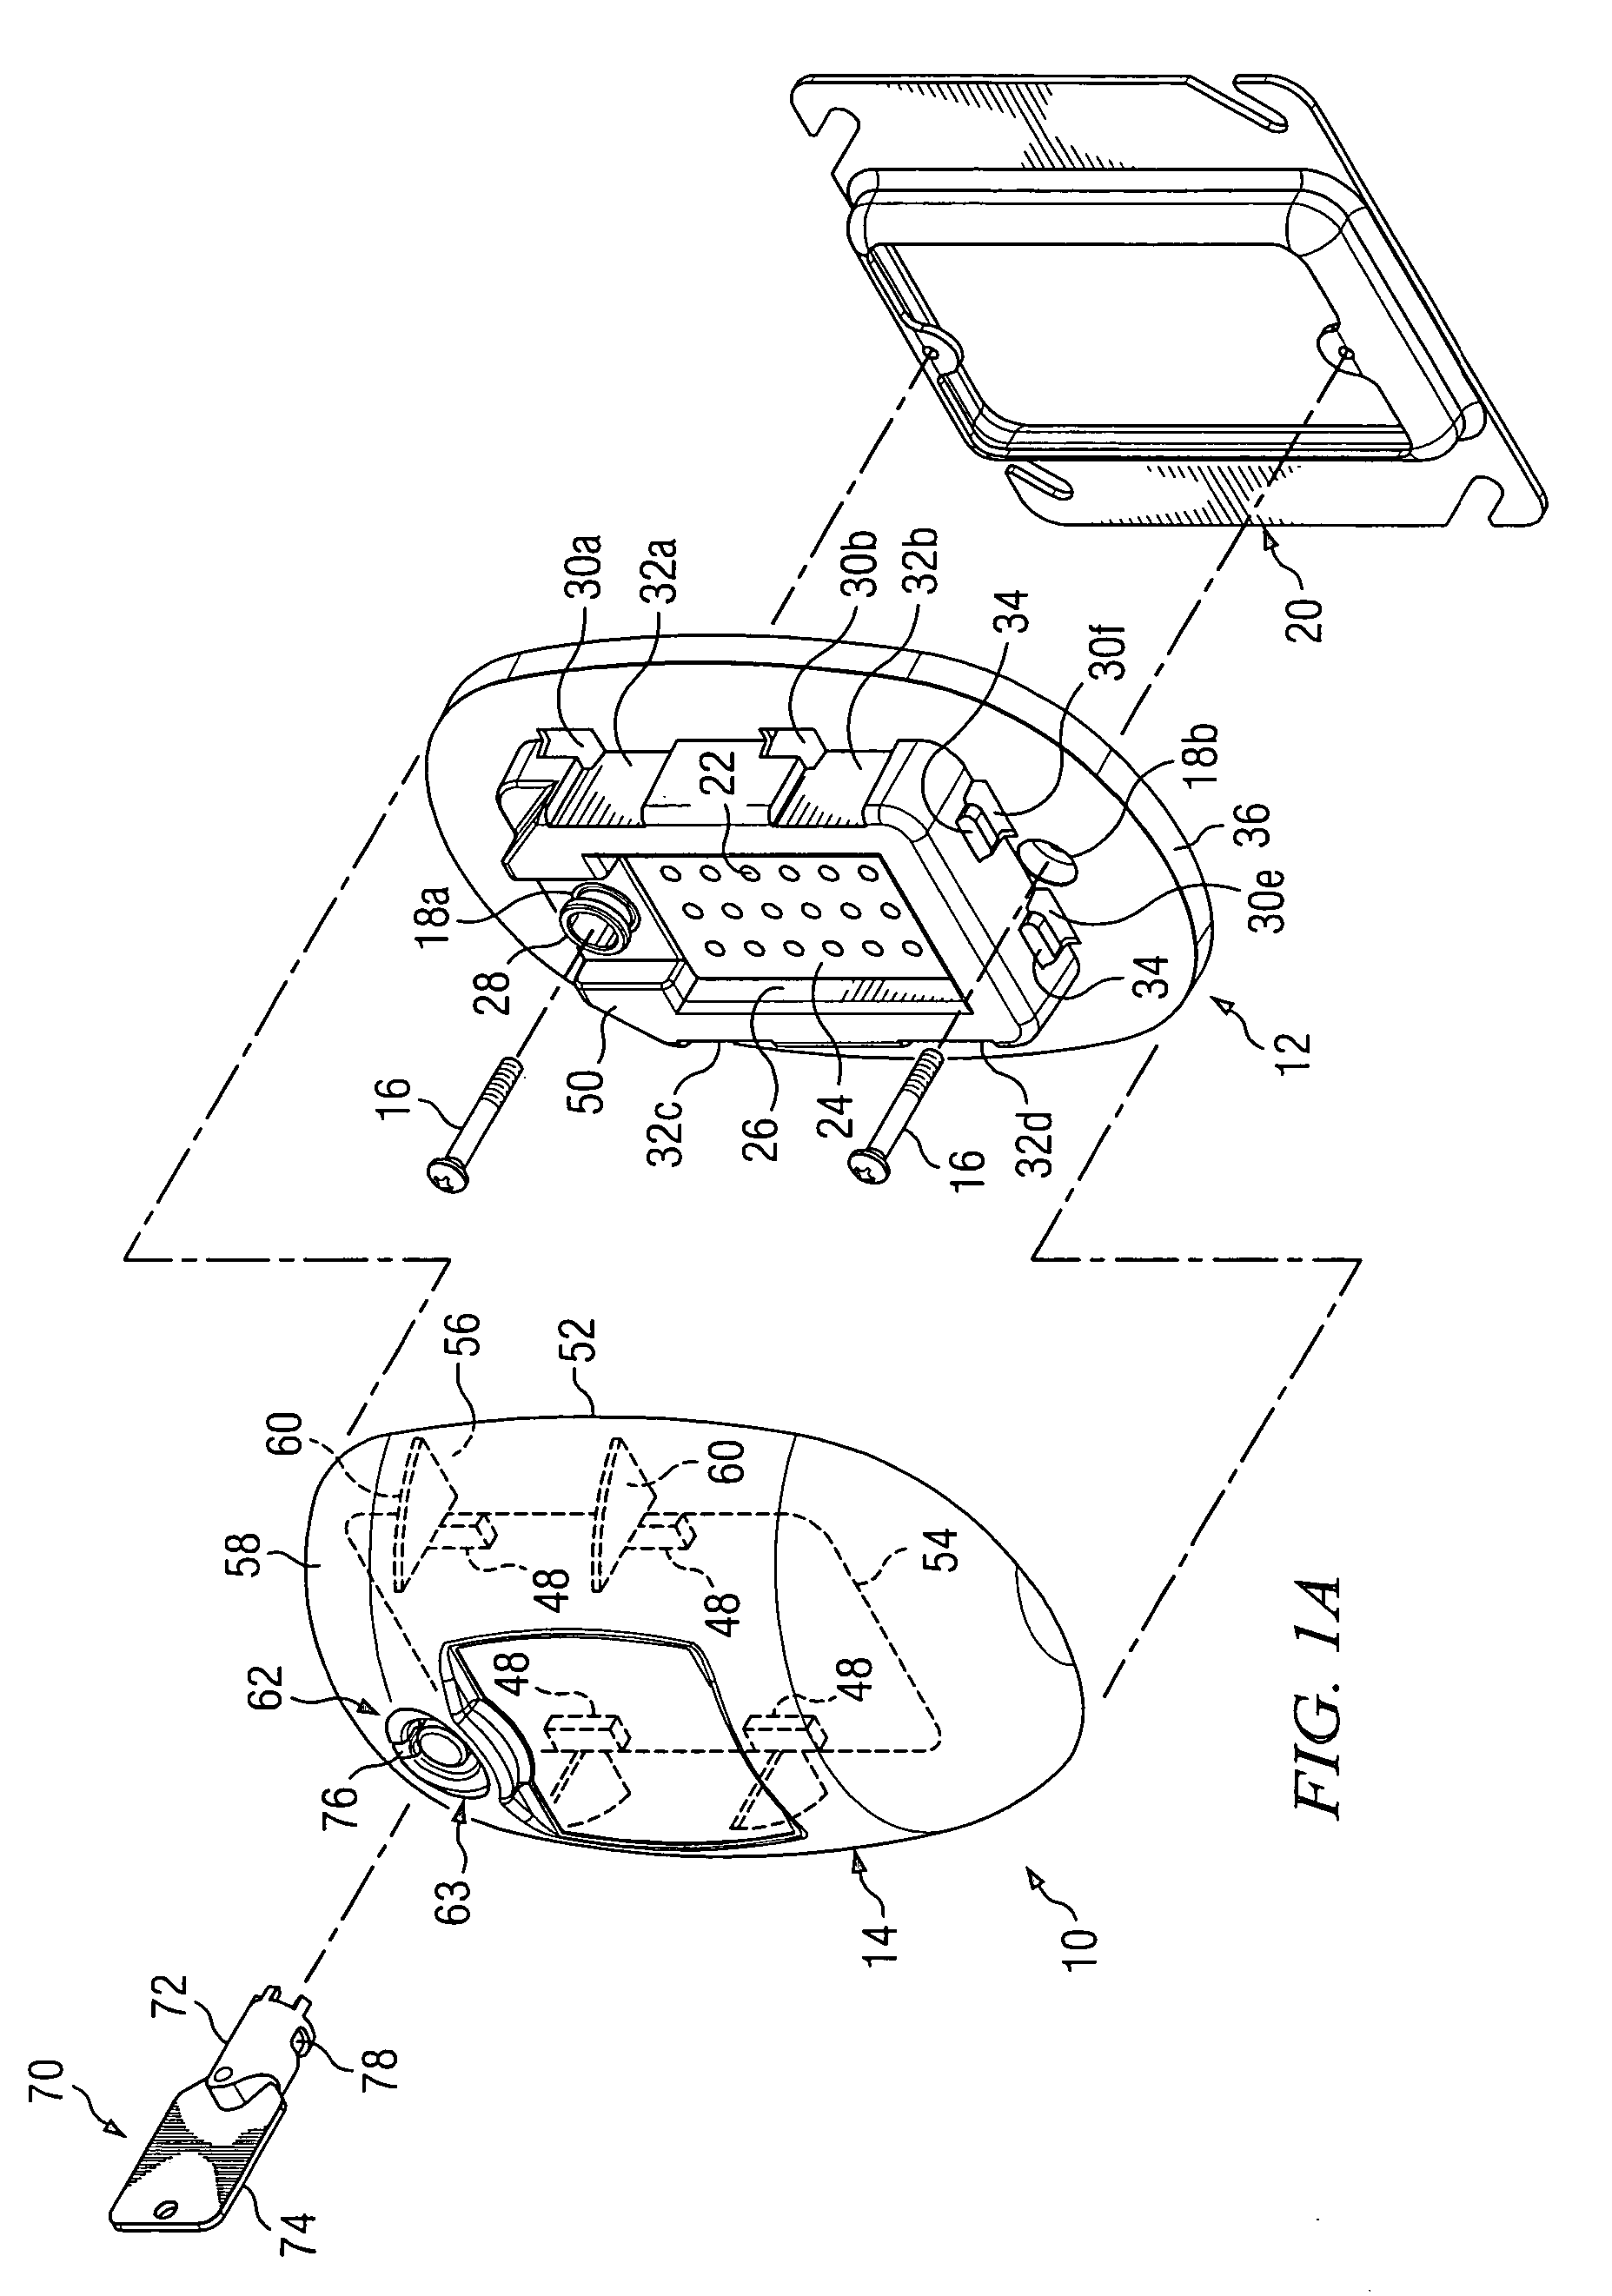 Key for engaging a locking mechanism of a port cover for protecting from unauthorized access one or more ports of a system integrated into a structure for injection of a material into one or more cavities in the structure